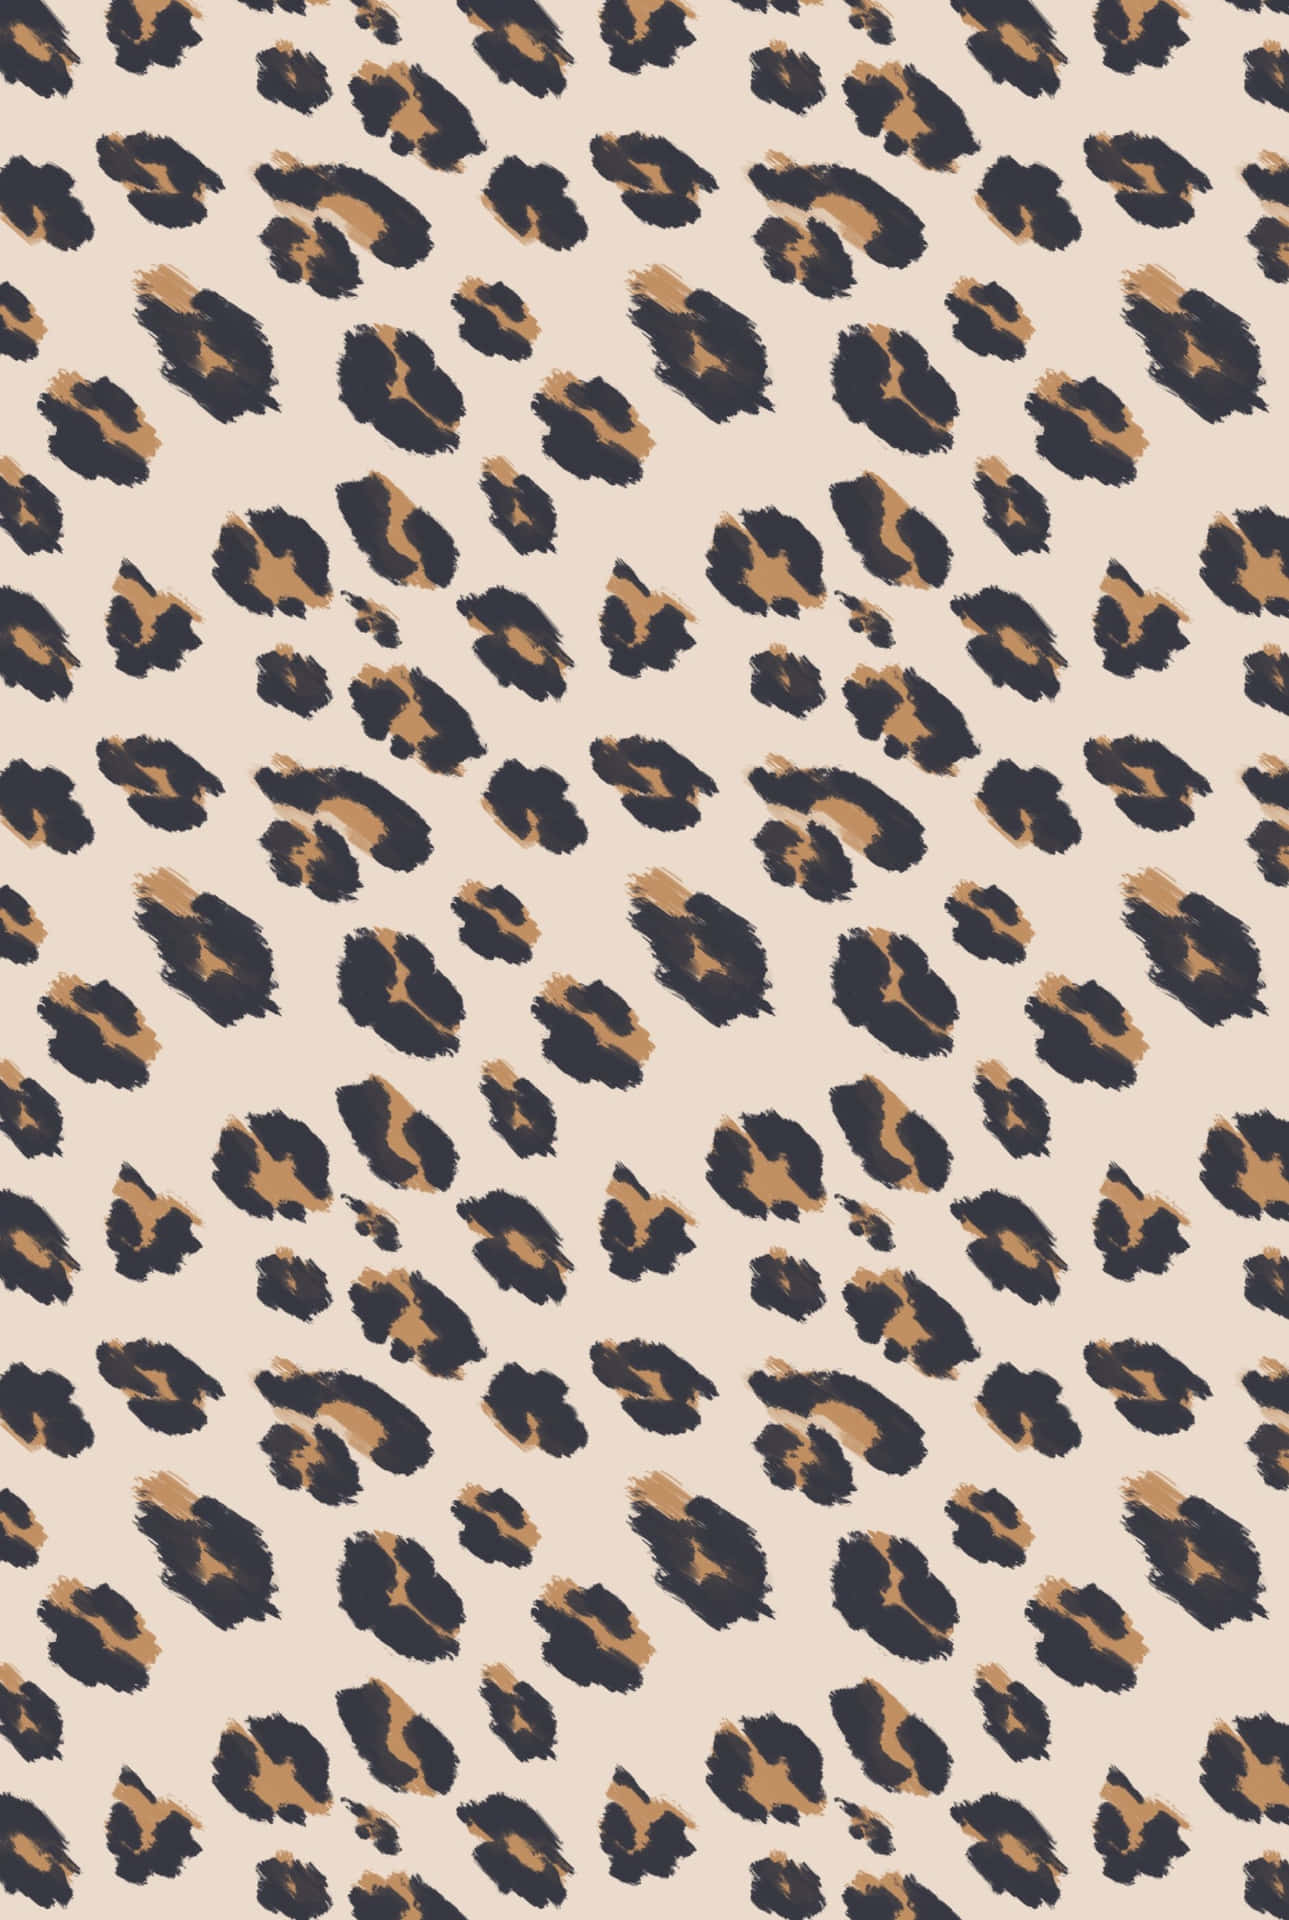 Exotic Leopard Print Pattern On A Muted Beige Backdrop.